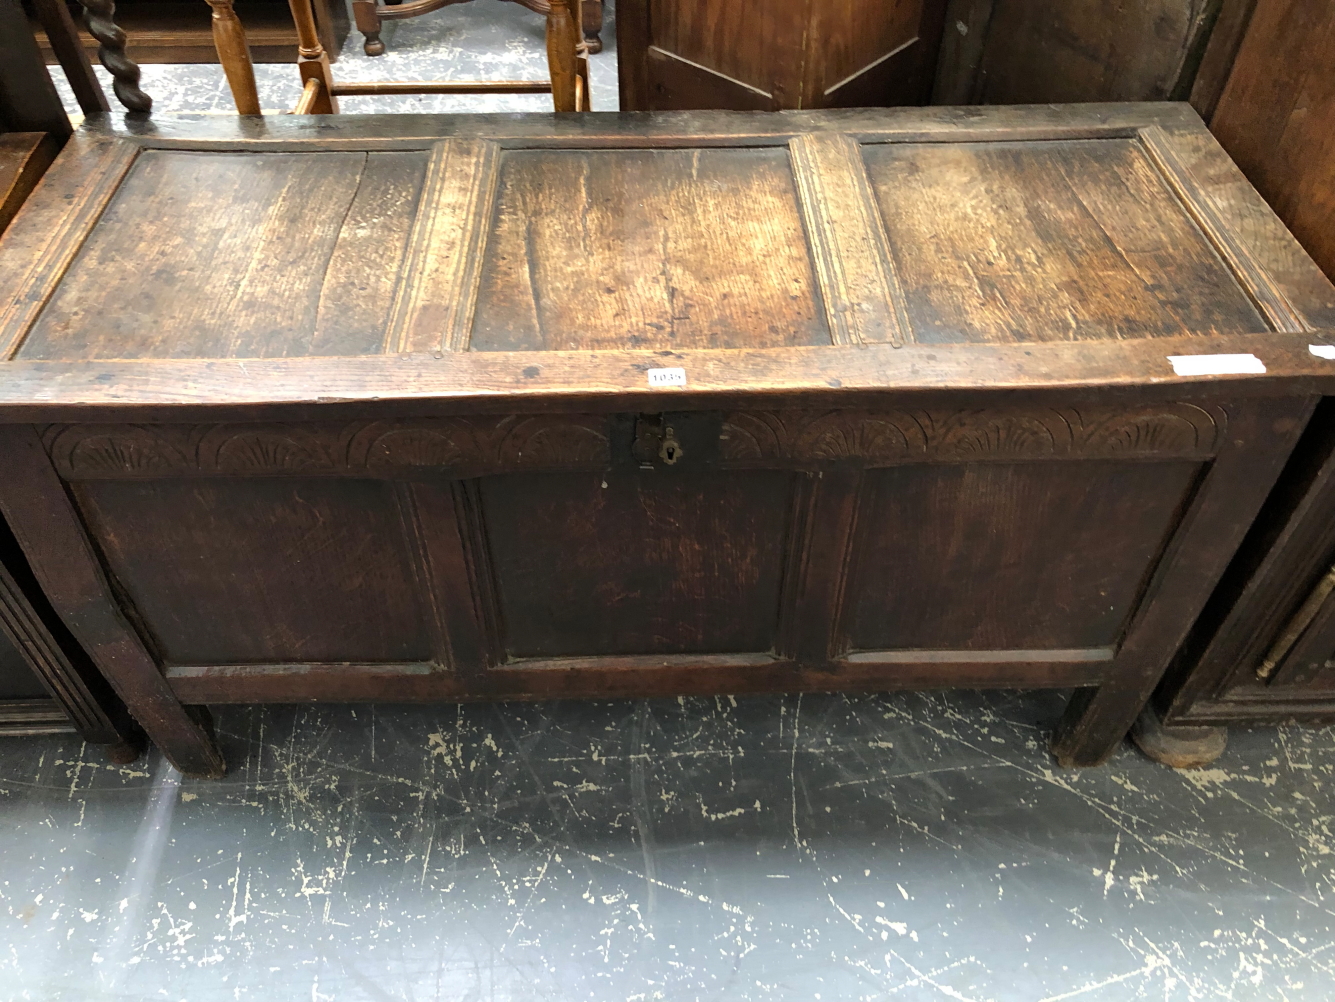 AN 18th C. OAK COFFER CARVED WITH A ROUND ARCH BAND ABOVE THE THREE PANELLED FRONT AND STILE LEGS. W